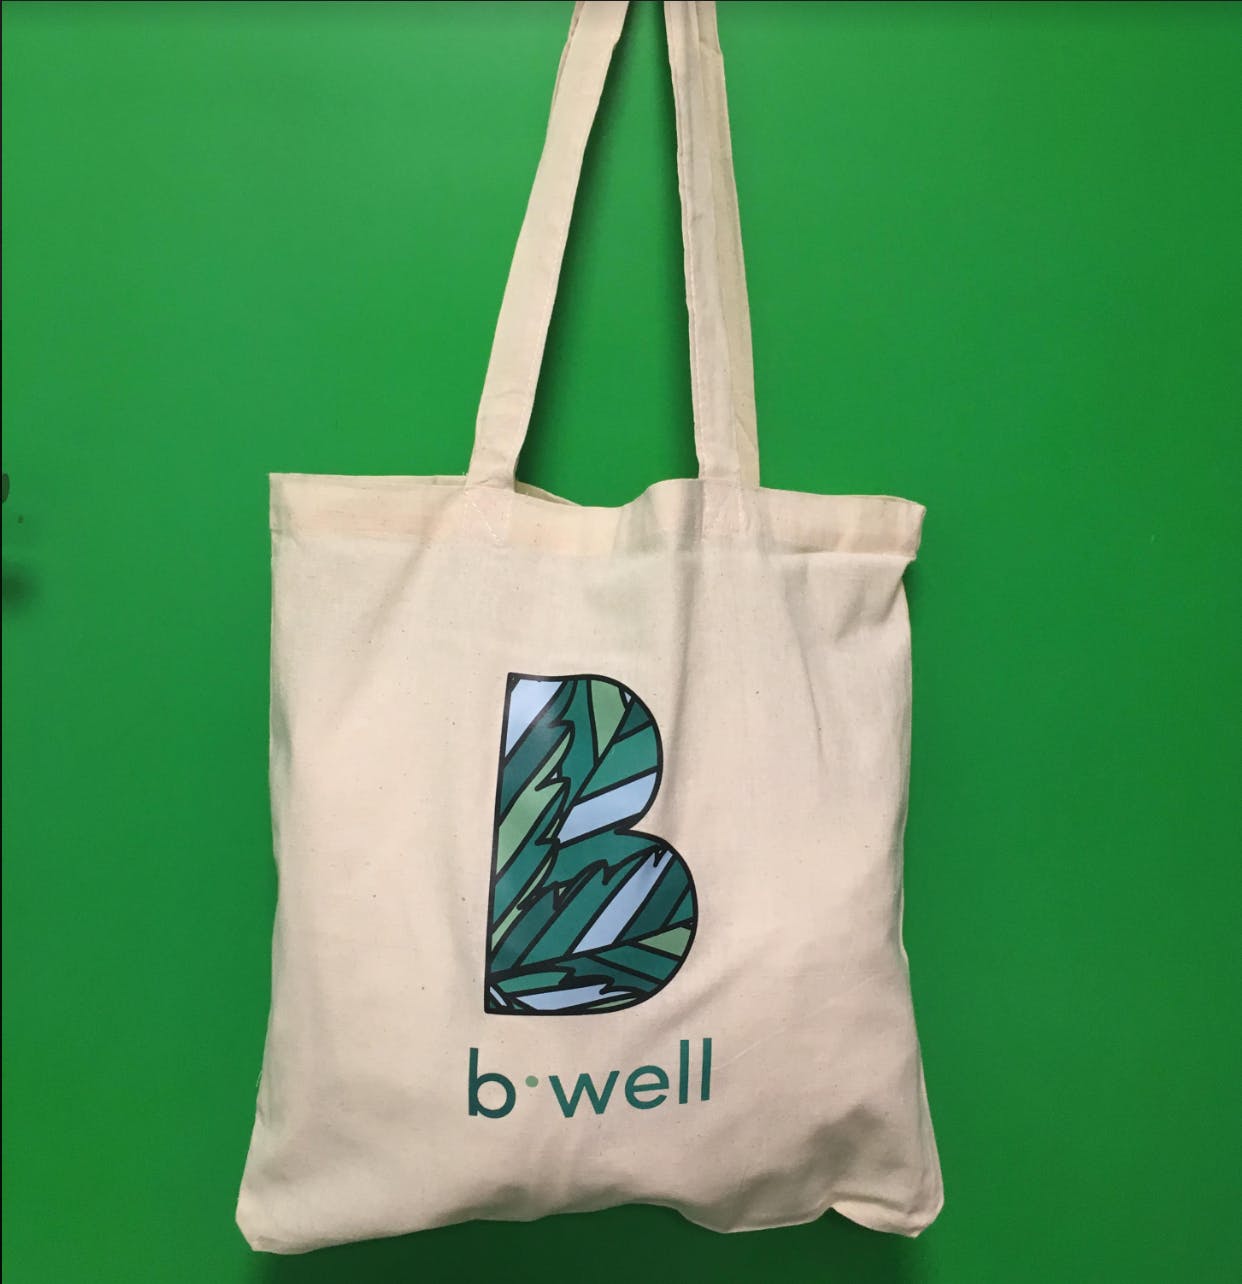 gear-bwell-totte-bag